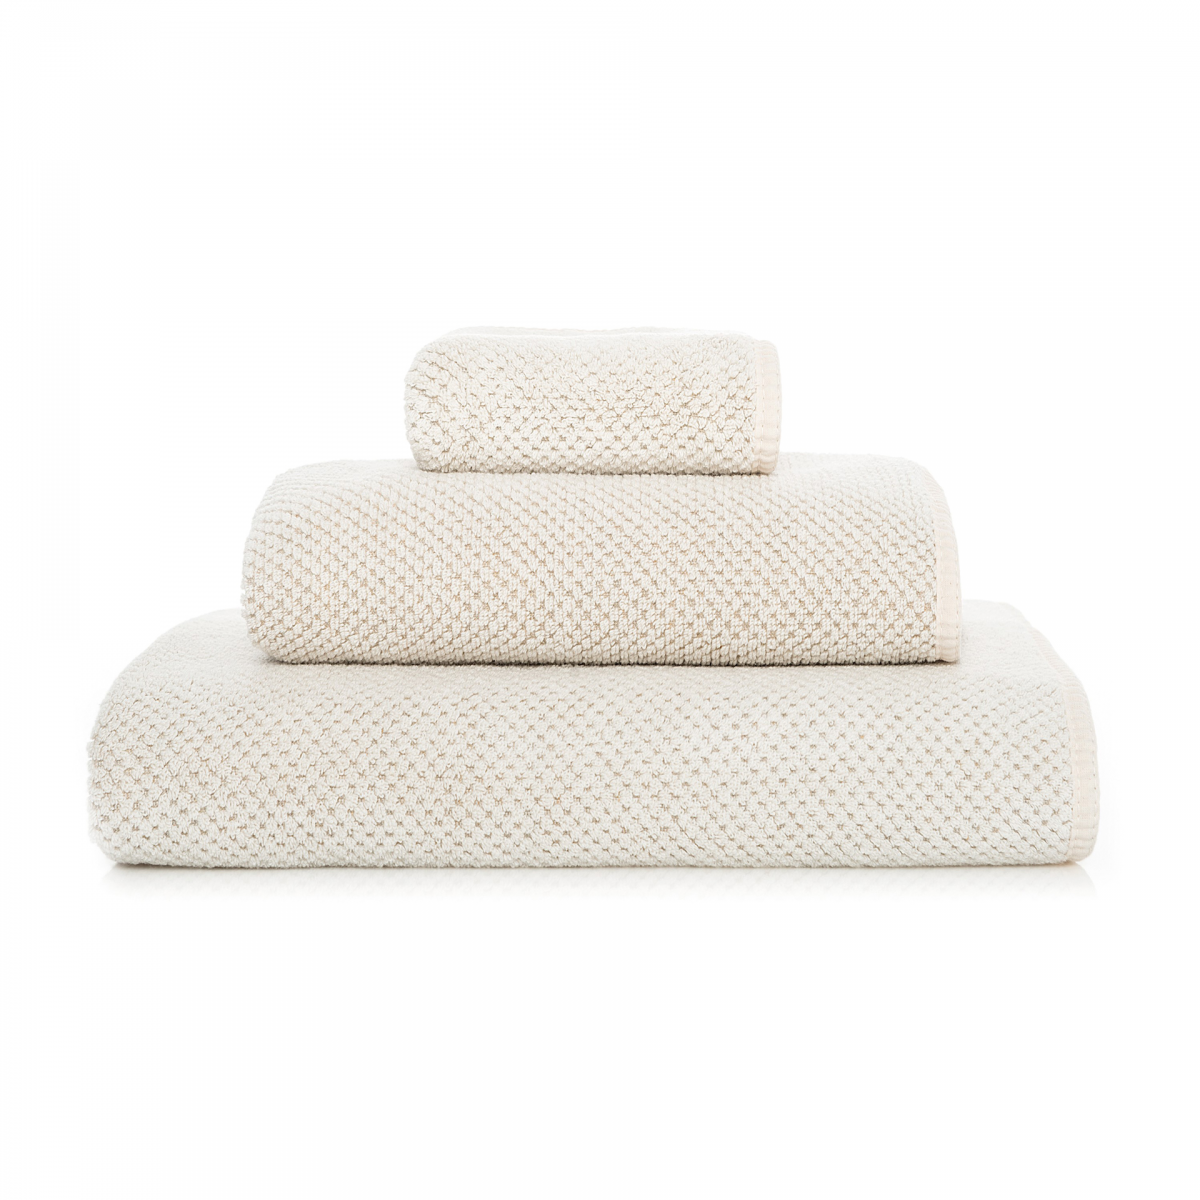 Luxurious waffle towels made in Portugal. - 1005092520002